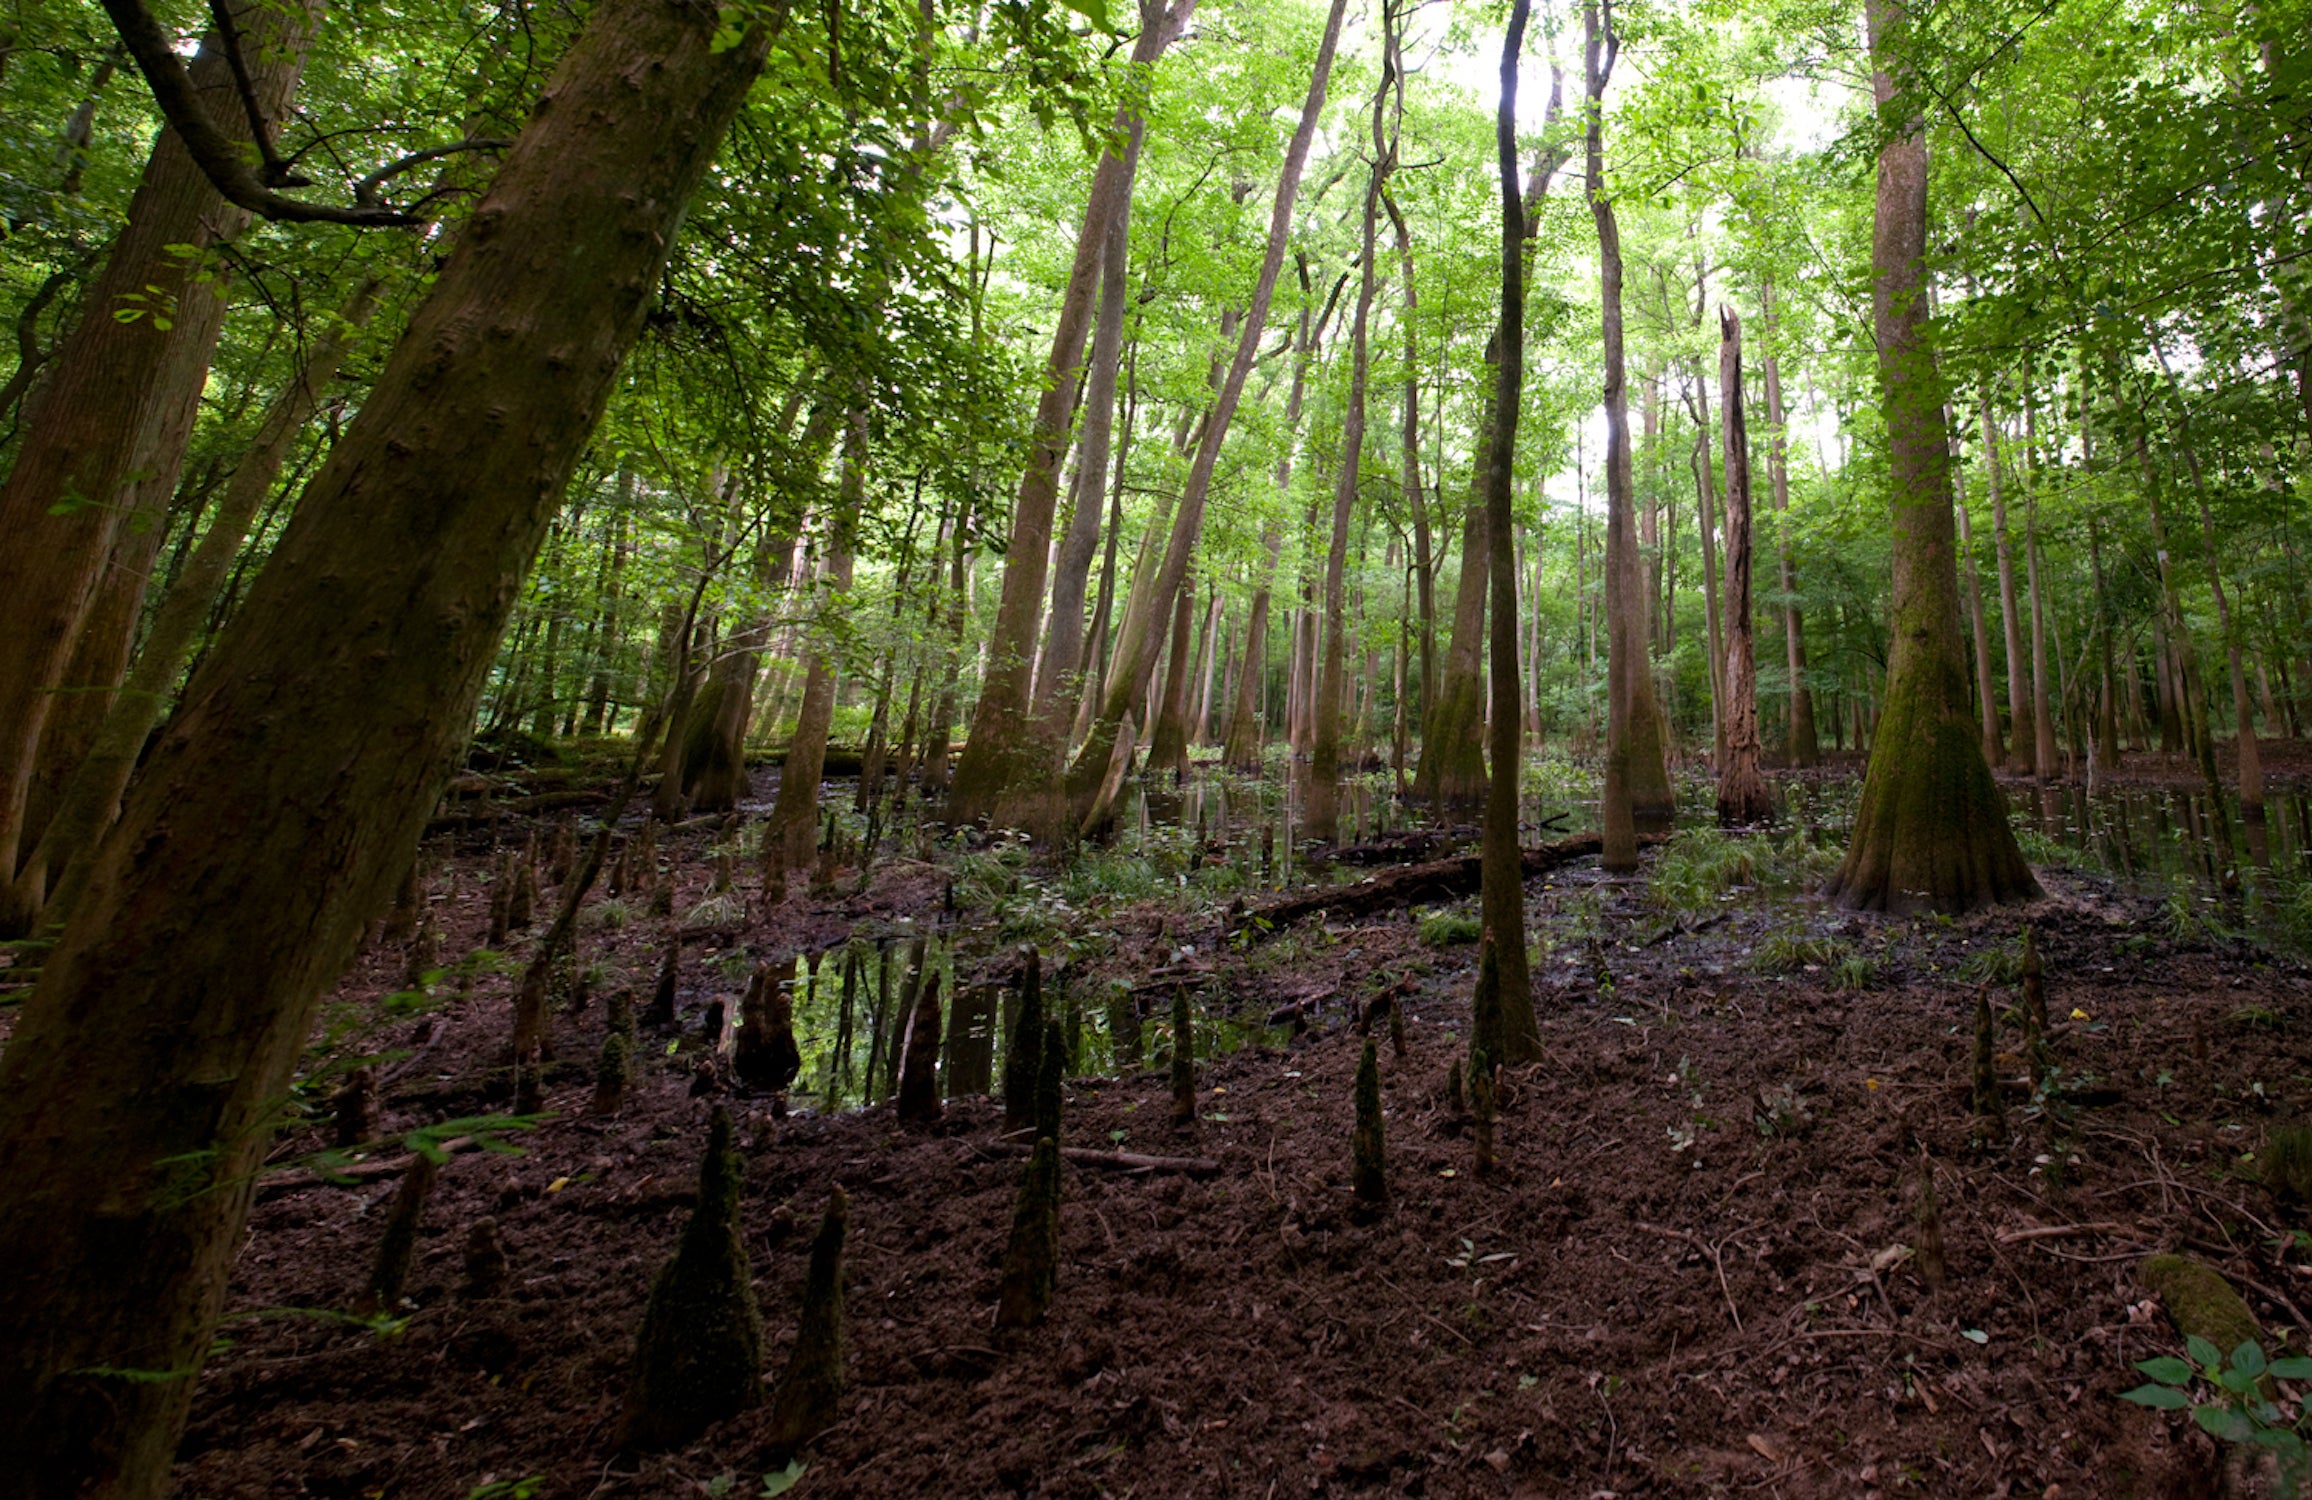 Congaree National Park in South Carolina protects an ancient forest.